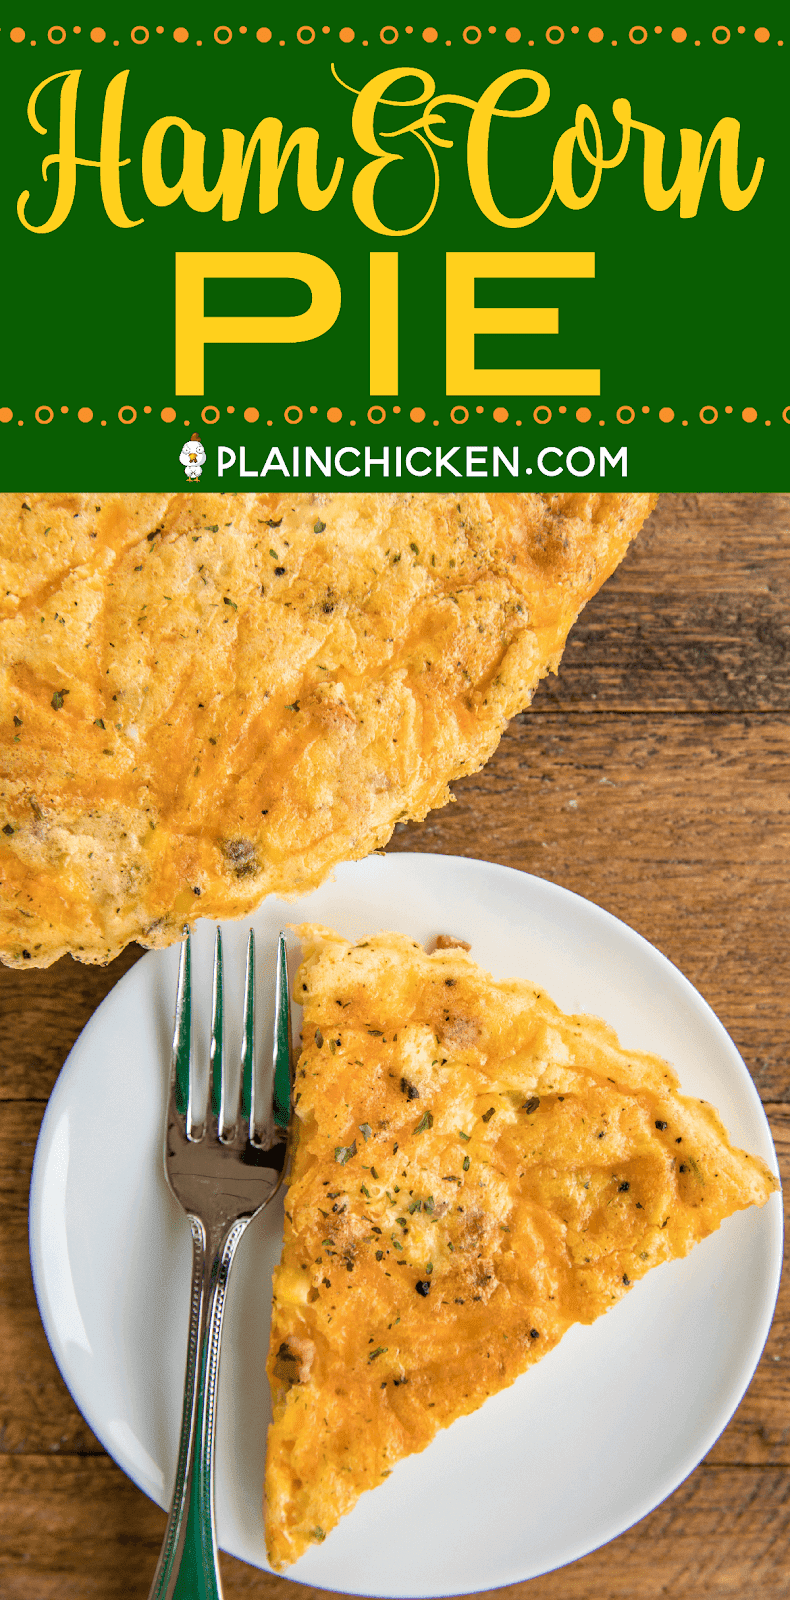 Ham & Corn Pie - crazy delicious! Crustless quiche loaded with ham, corn and cheese. Ready to bake in minutes! Ham, corn, cheddar cheese, eggs, Bisquick and milk. Great for breakfast, lunch or dinner. The whole family loved this easy recipe! #quiche #ham #cheese #kidfriendlyrecipe #dinnerrecipe